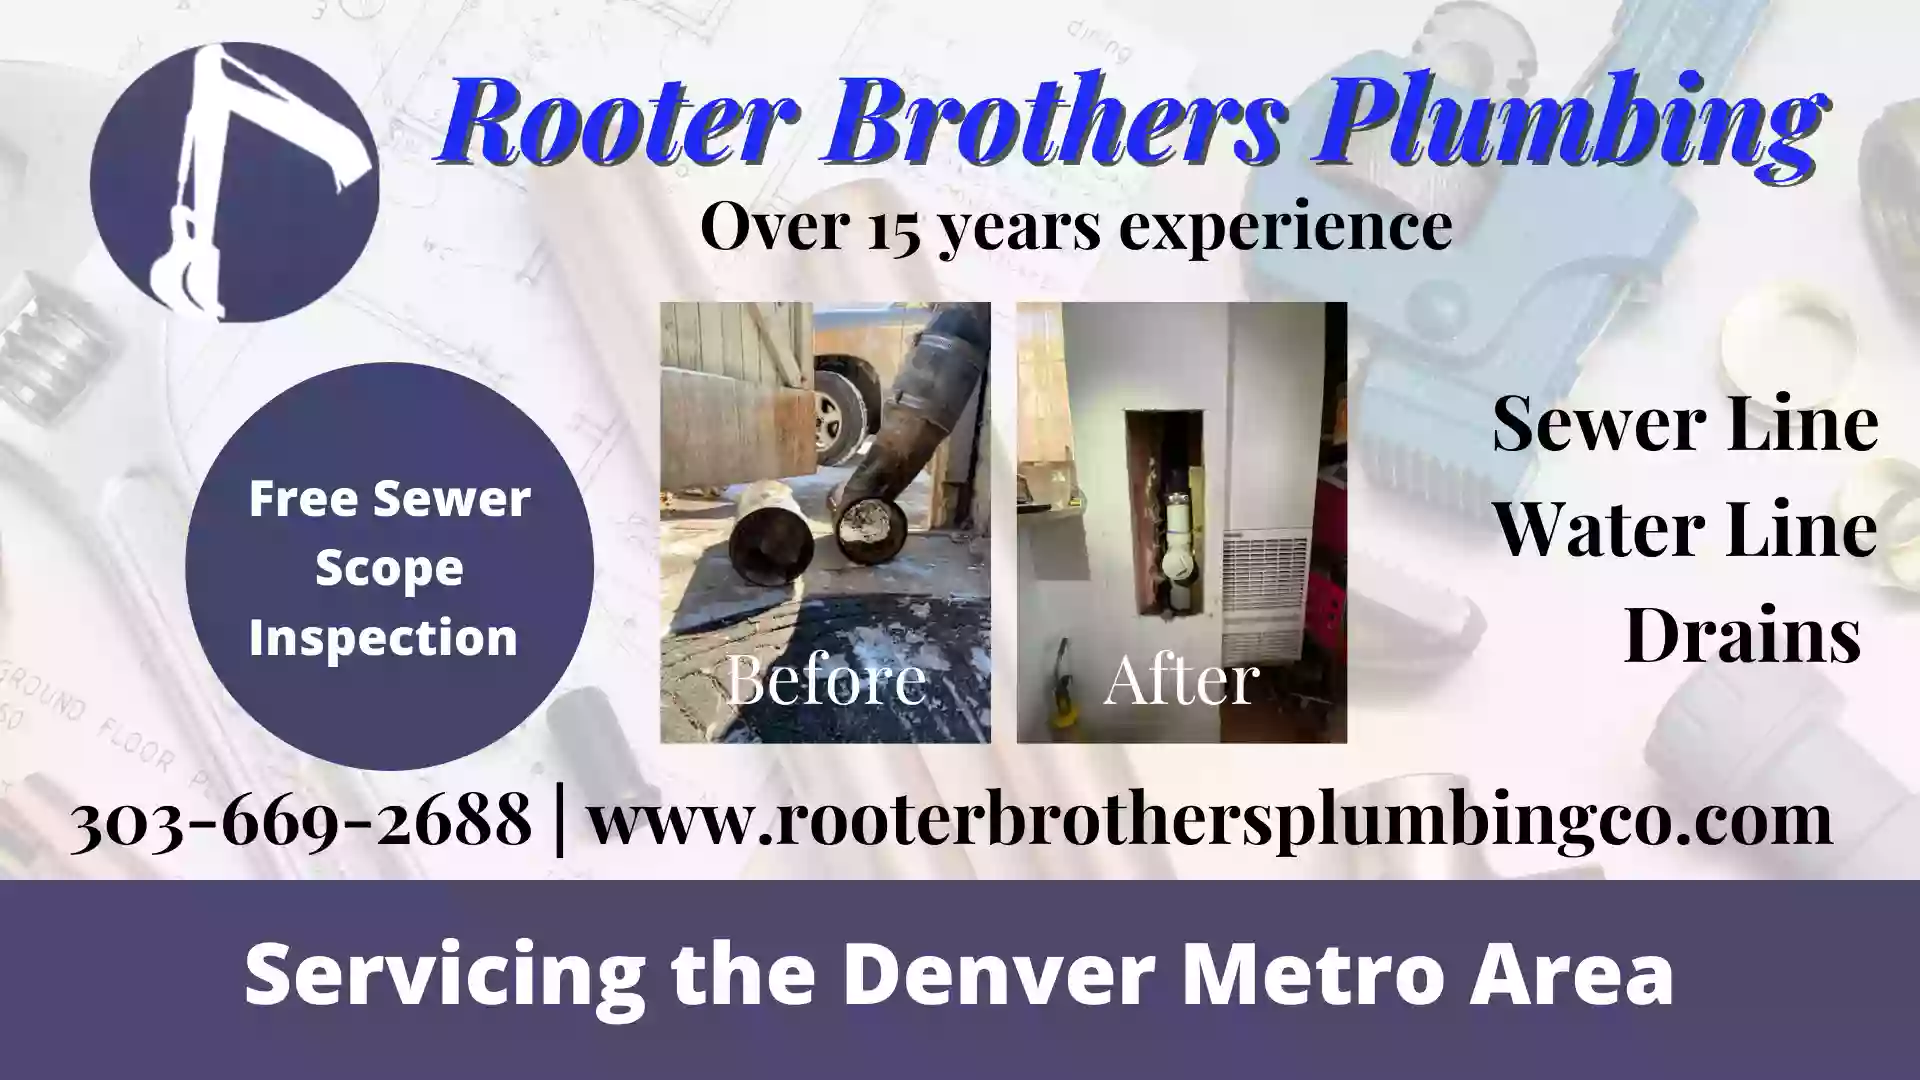 Rooter Brothers Plumbing LLC